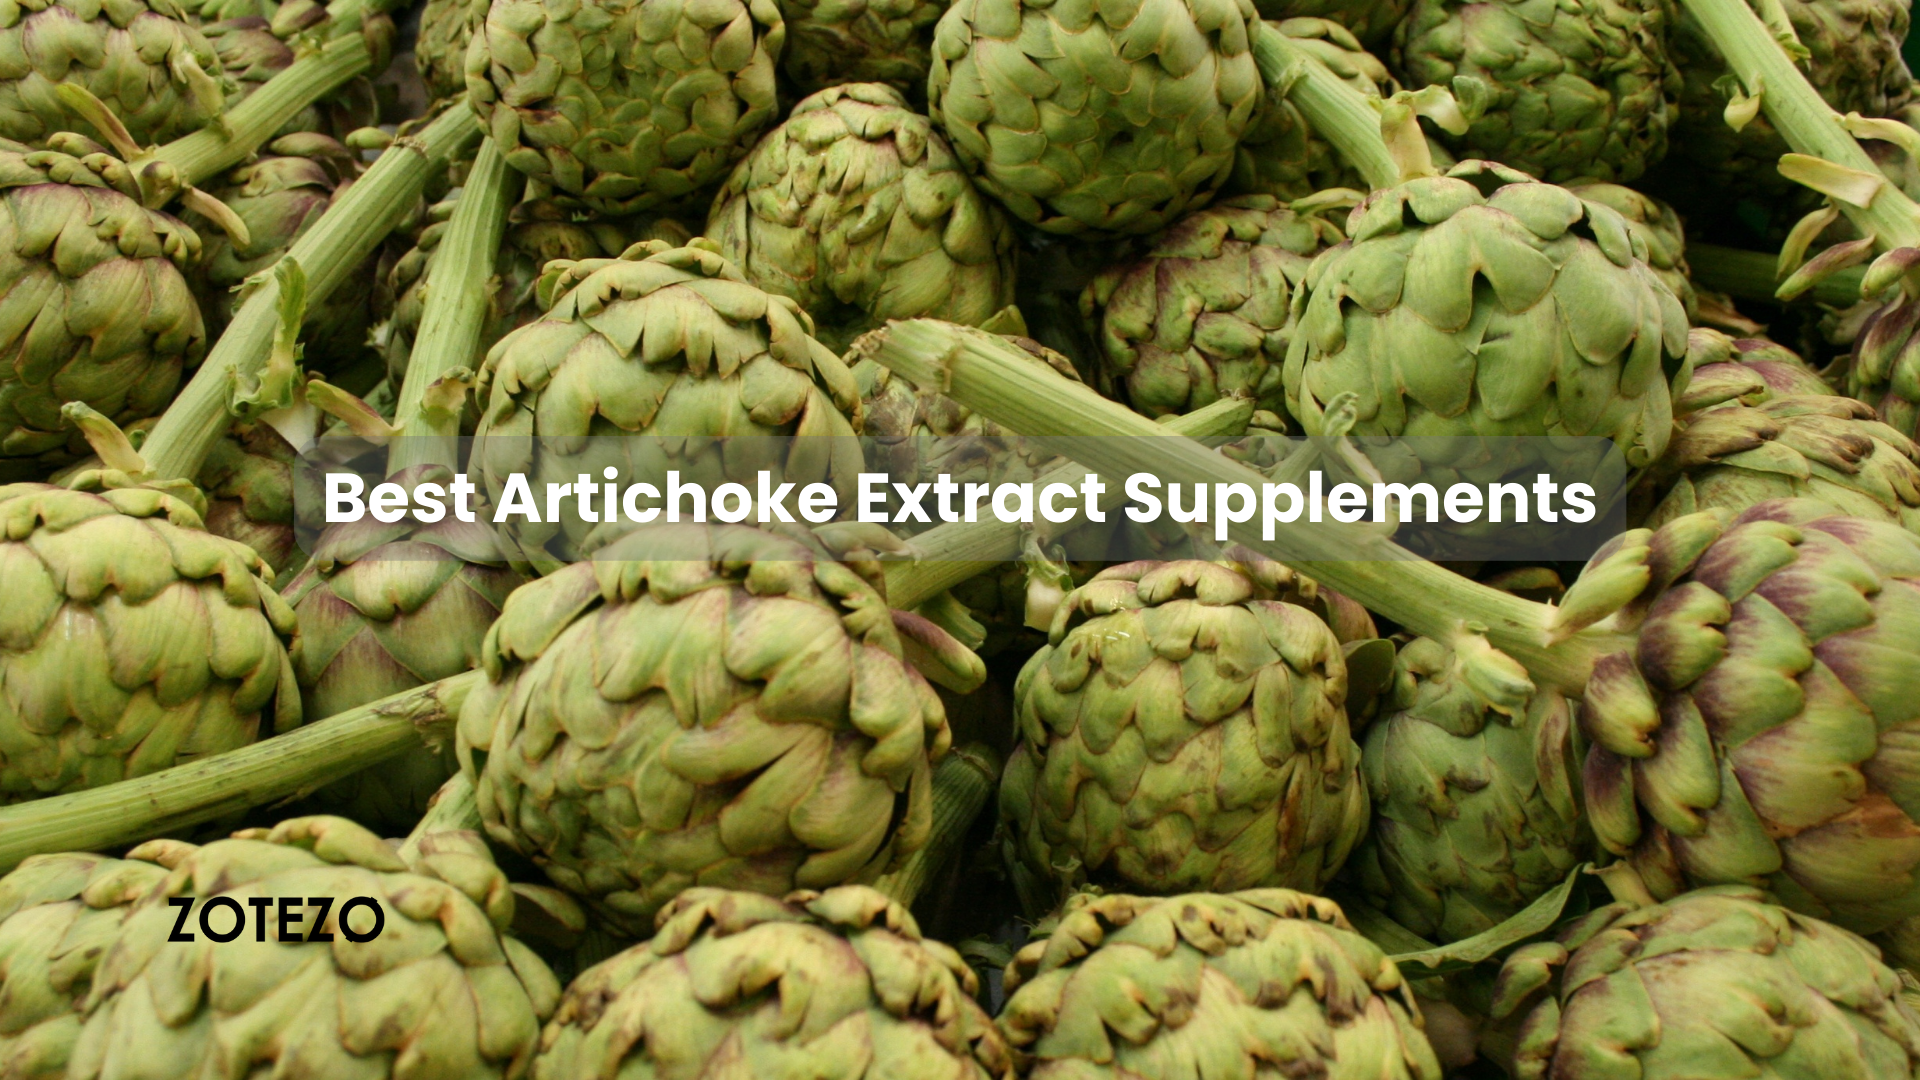 Artichoke Extract Supplements in France